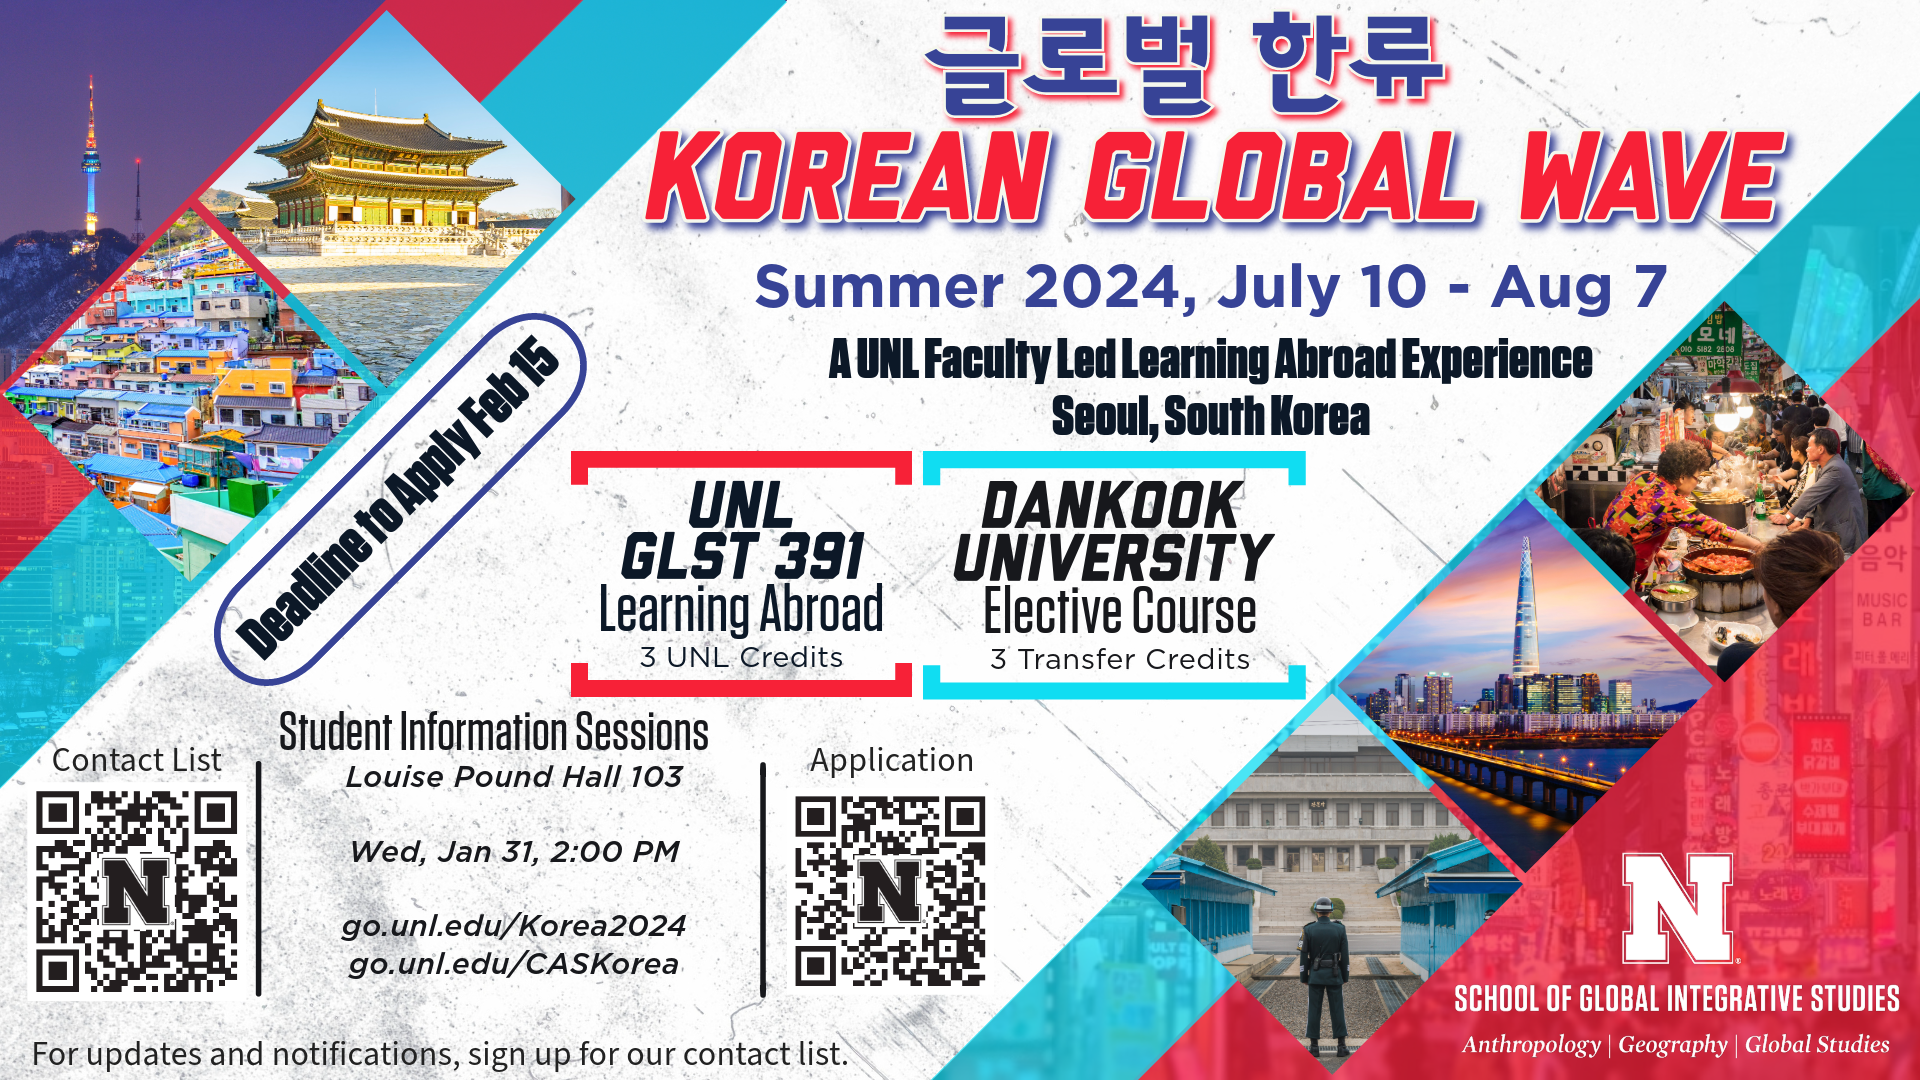 Spend your summer in Seoul, South Korea and earn 6 credits